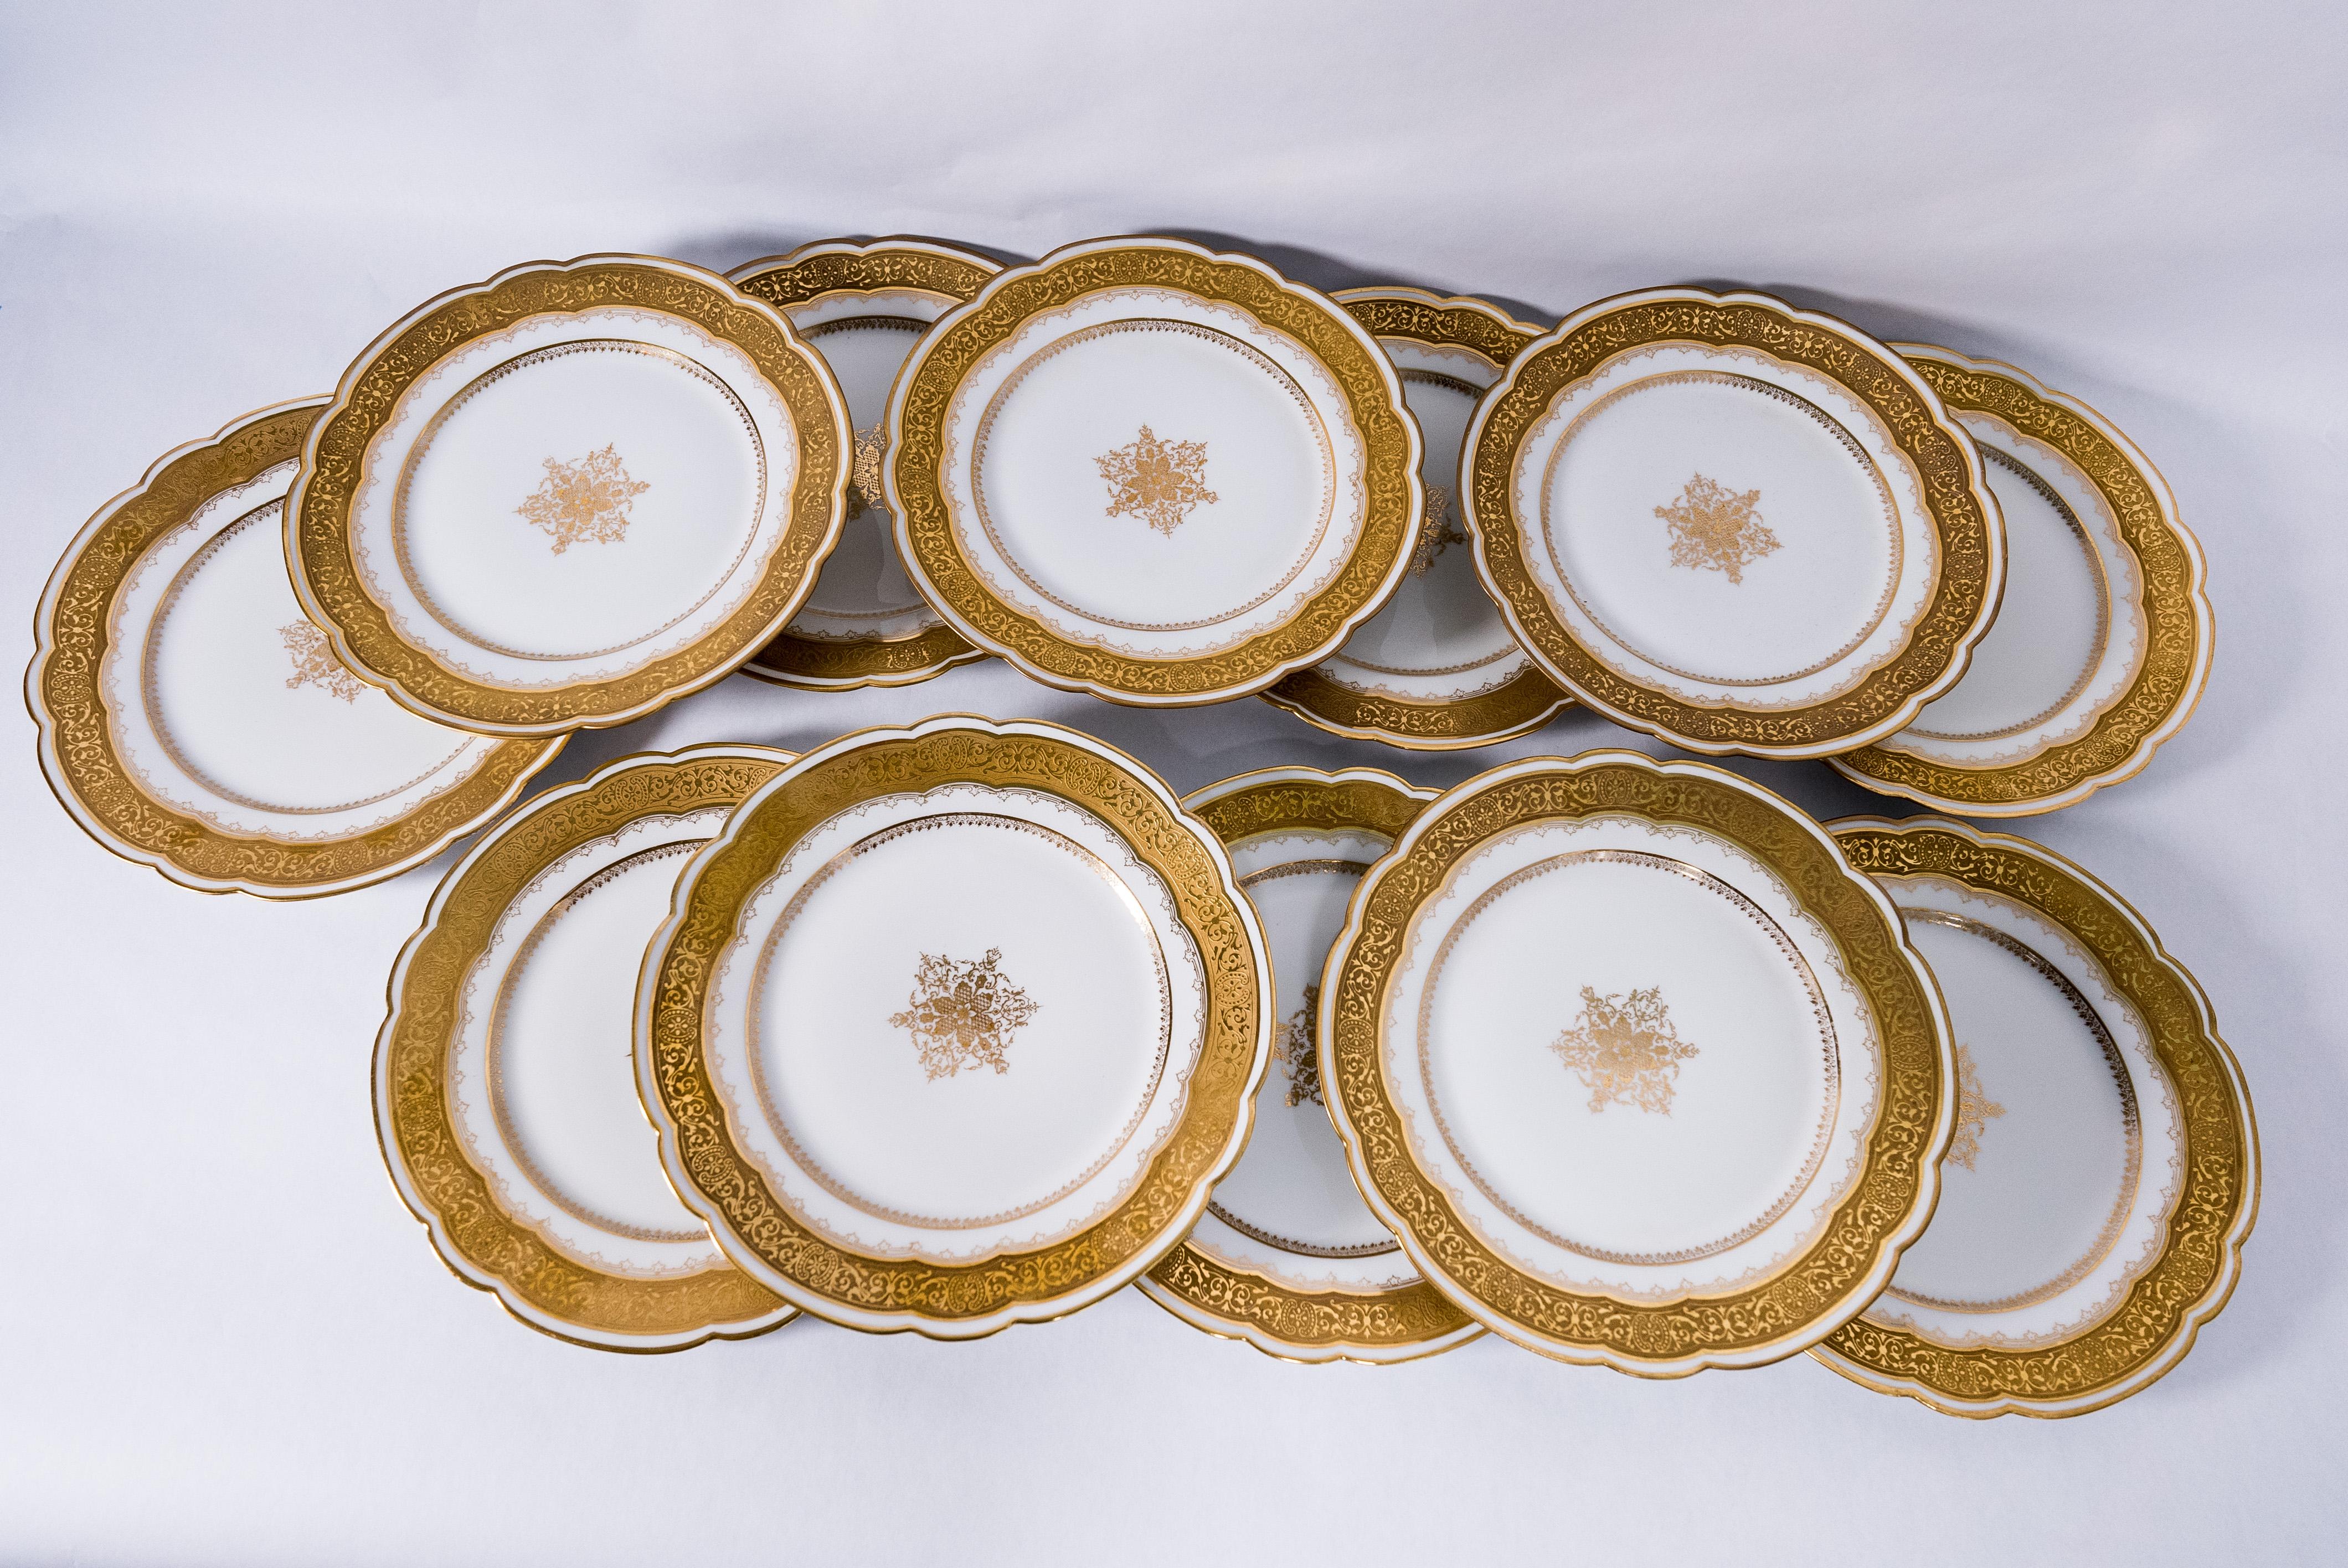 A lovely Circa 1890 set of dessert plates by the Limoges Factory M Redon. This group features a great scalloped shape to the plate with a nice detailed gilt surround band and a generous center medallion. They could also be used for luncheon or small